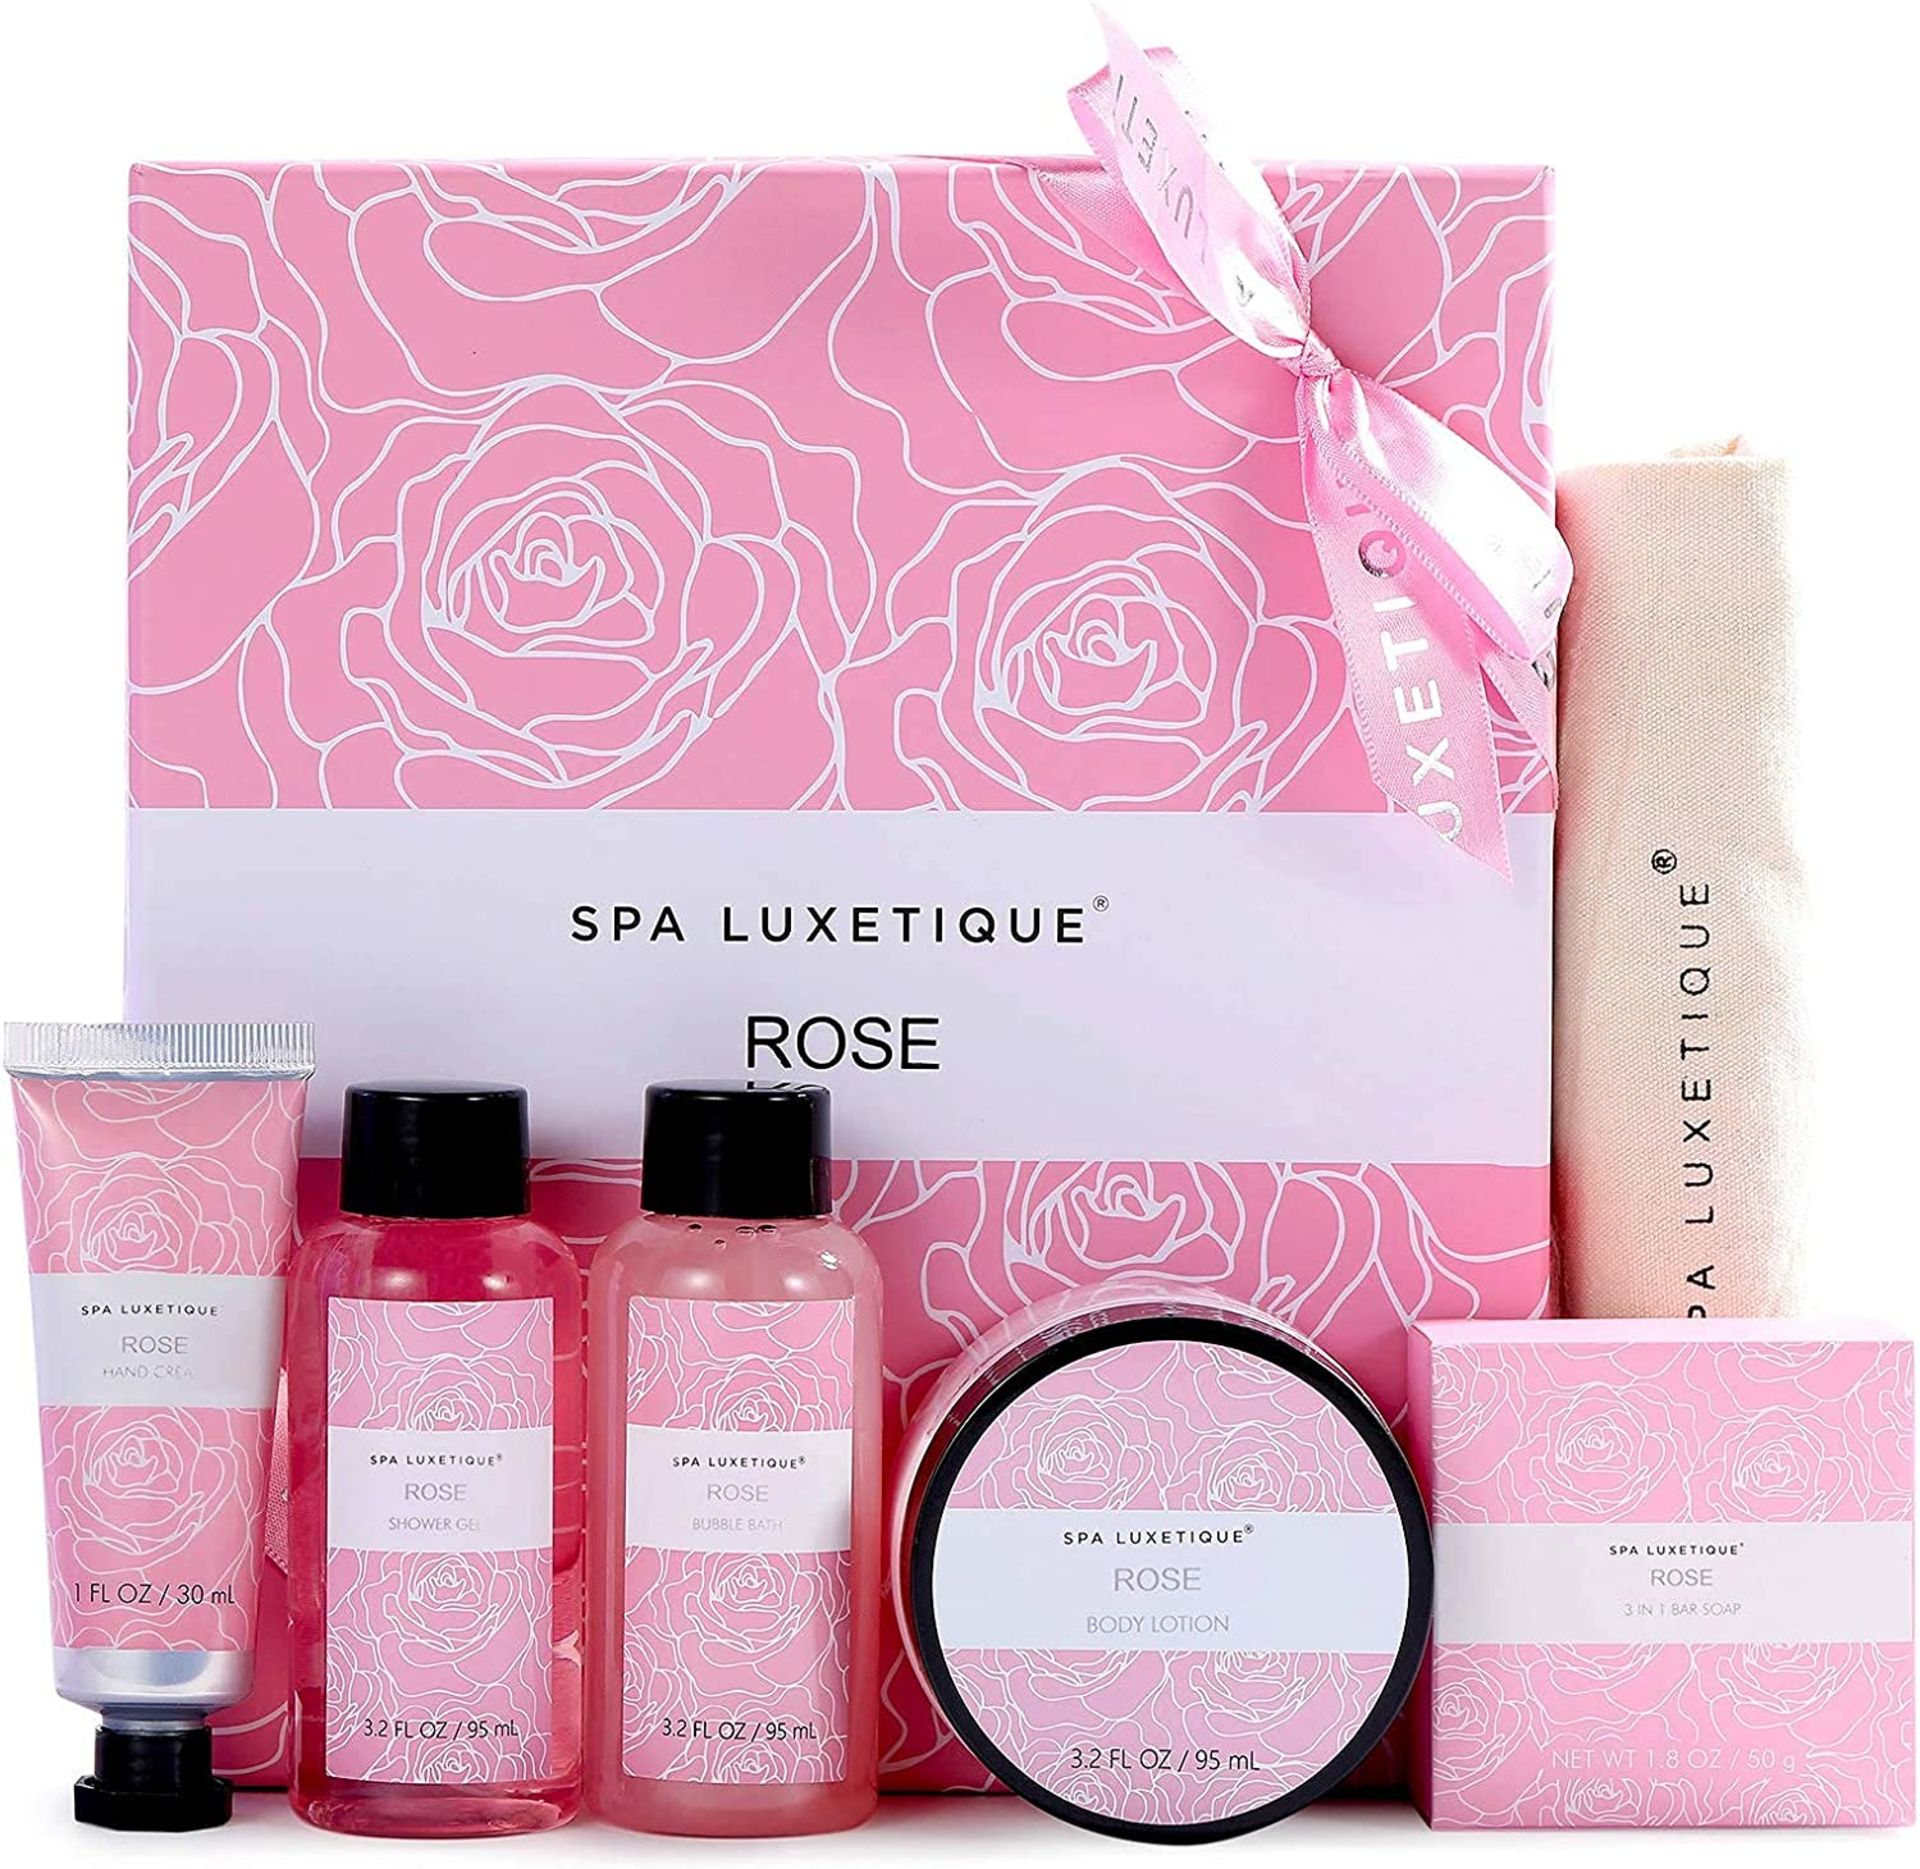 Spa Luxetique Spa Gift Set, Pampering Gifts for Women, 6Pcs Rose Bath Gift Set - Image 5 of 5